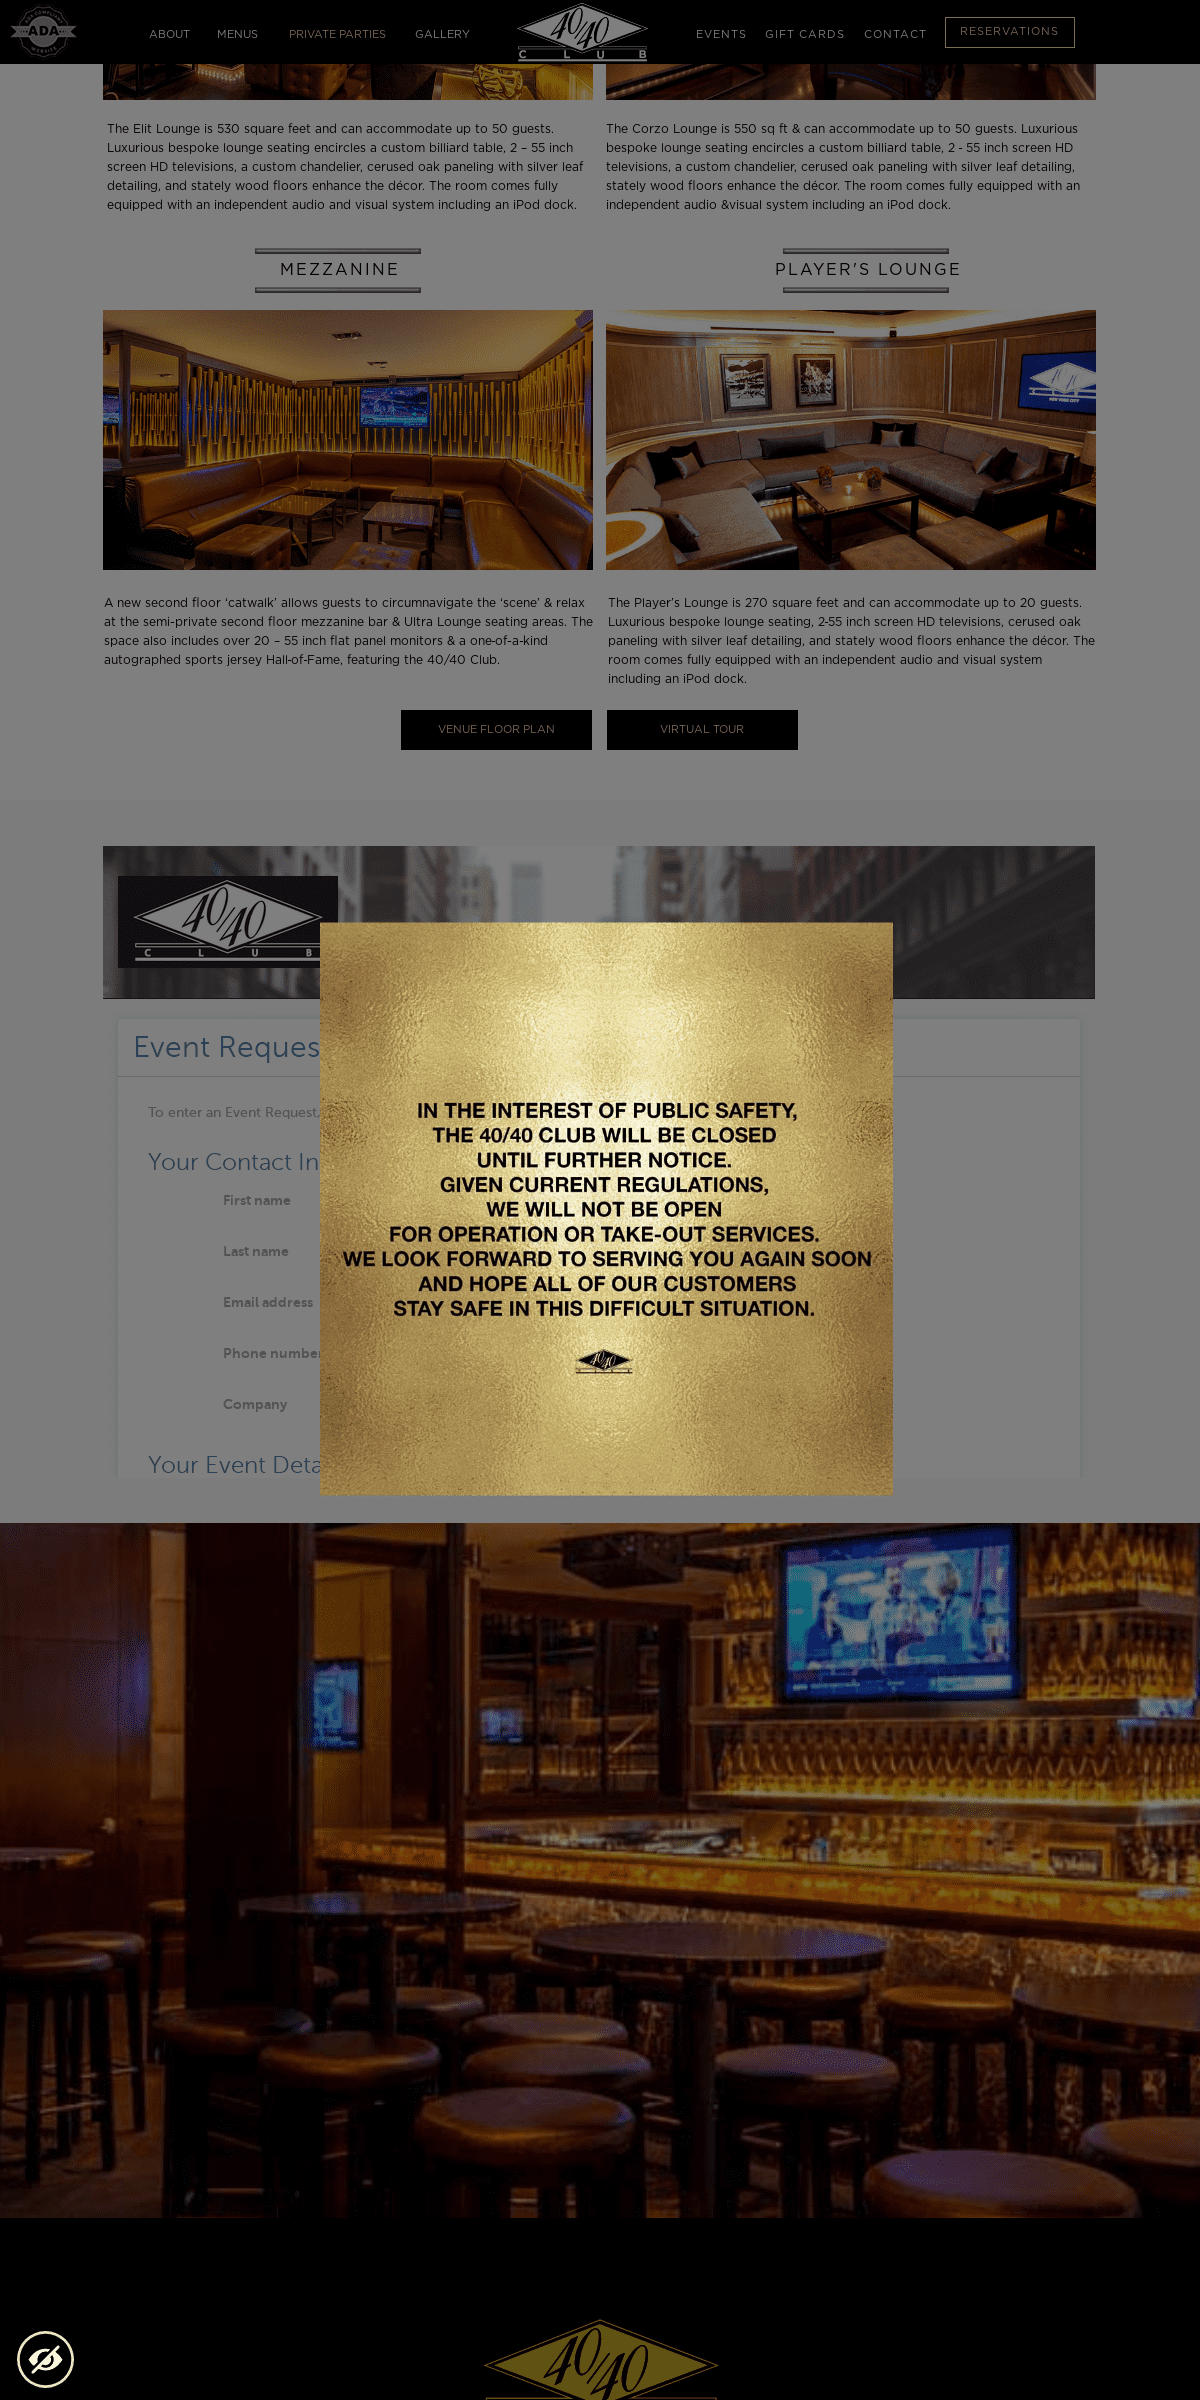 A complete backup of the4040club.com